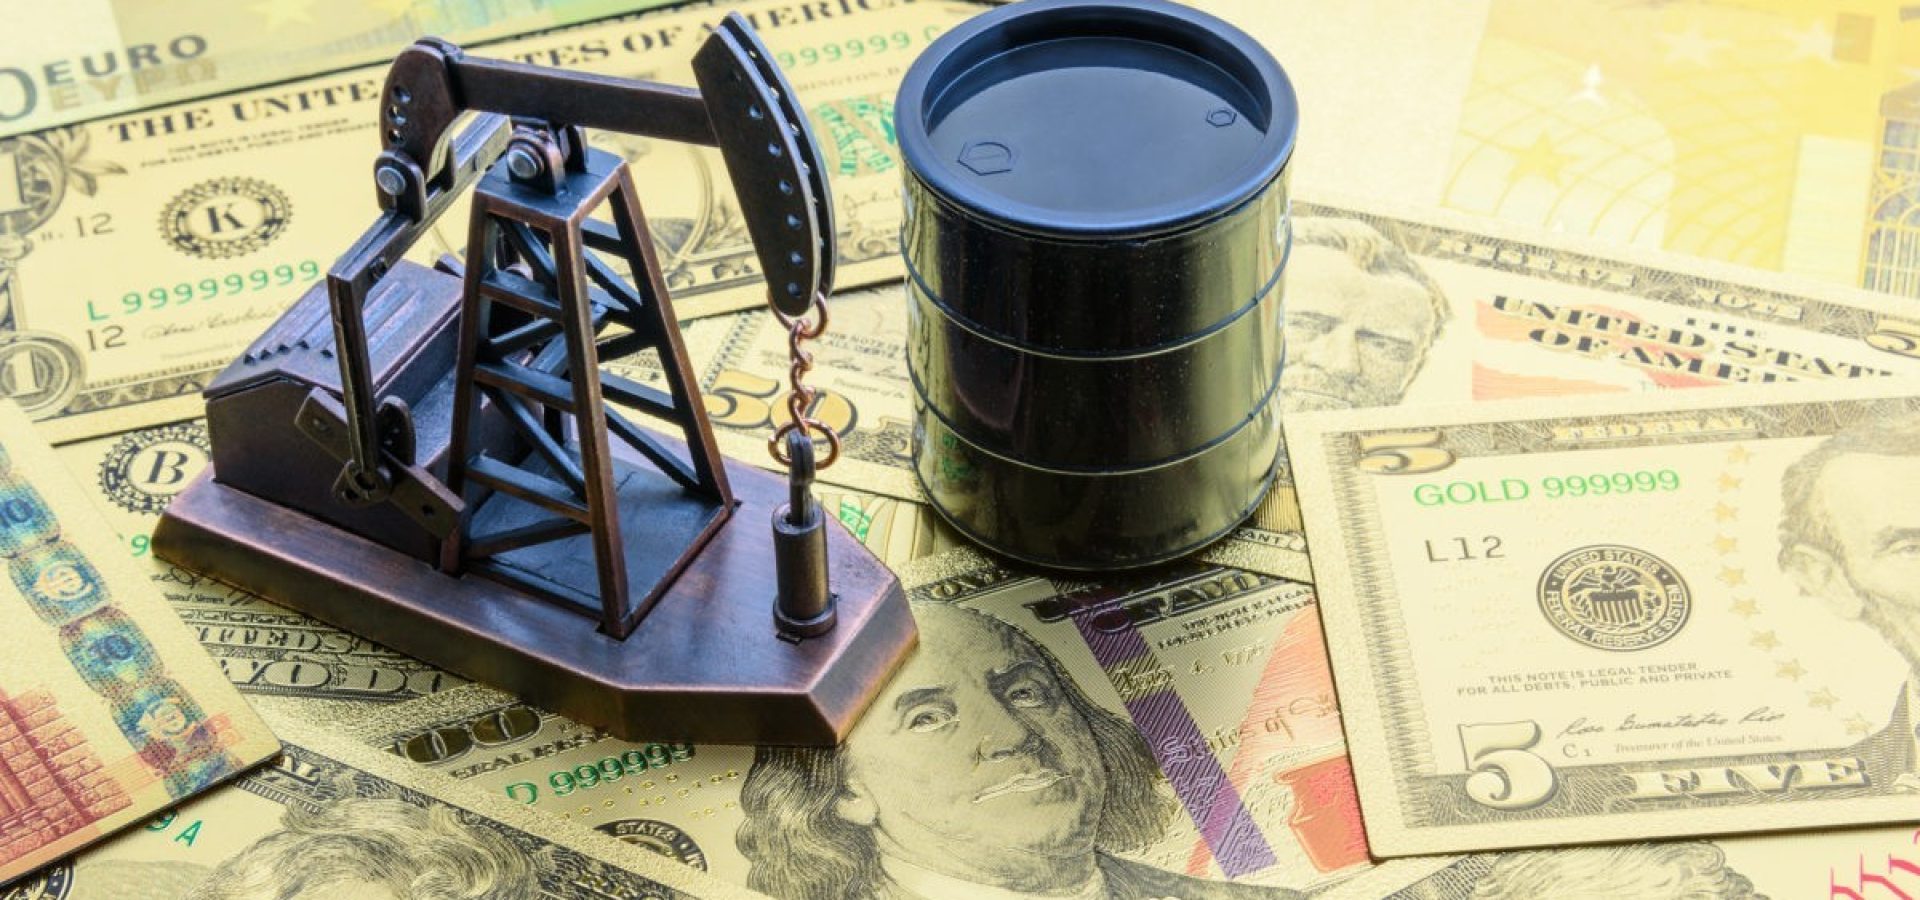 Wibest – Petroleum and oil: A crude oil pump jack and a barrel on top of US dollar bills.